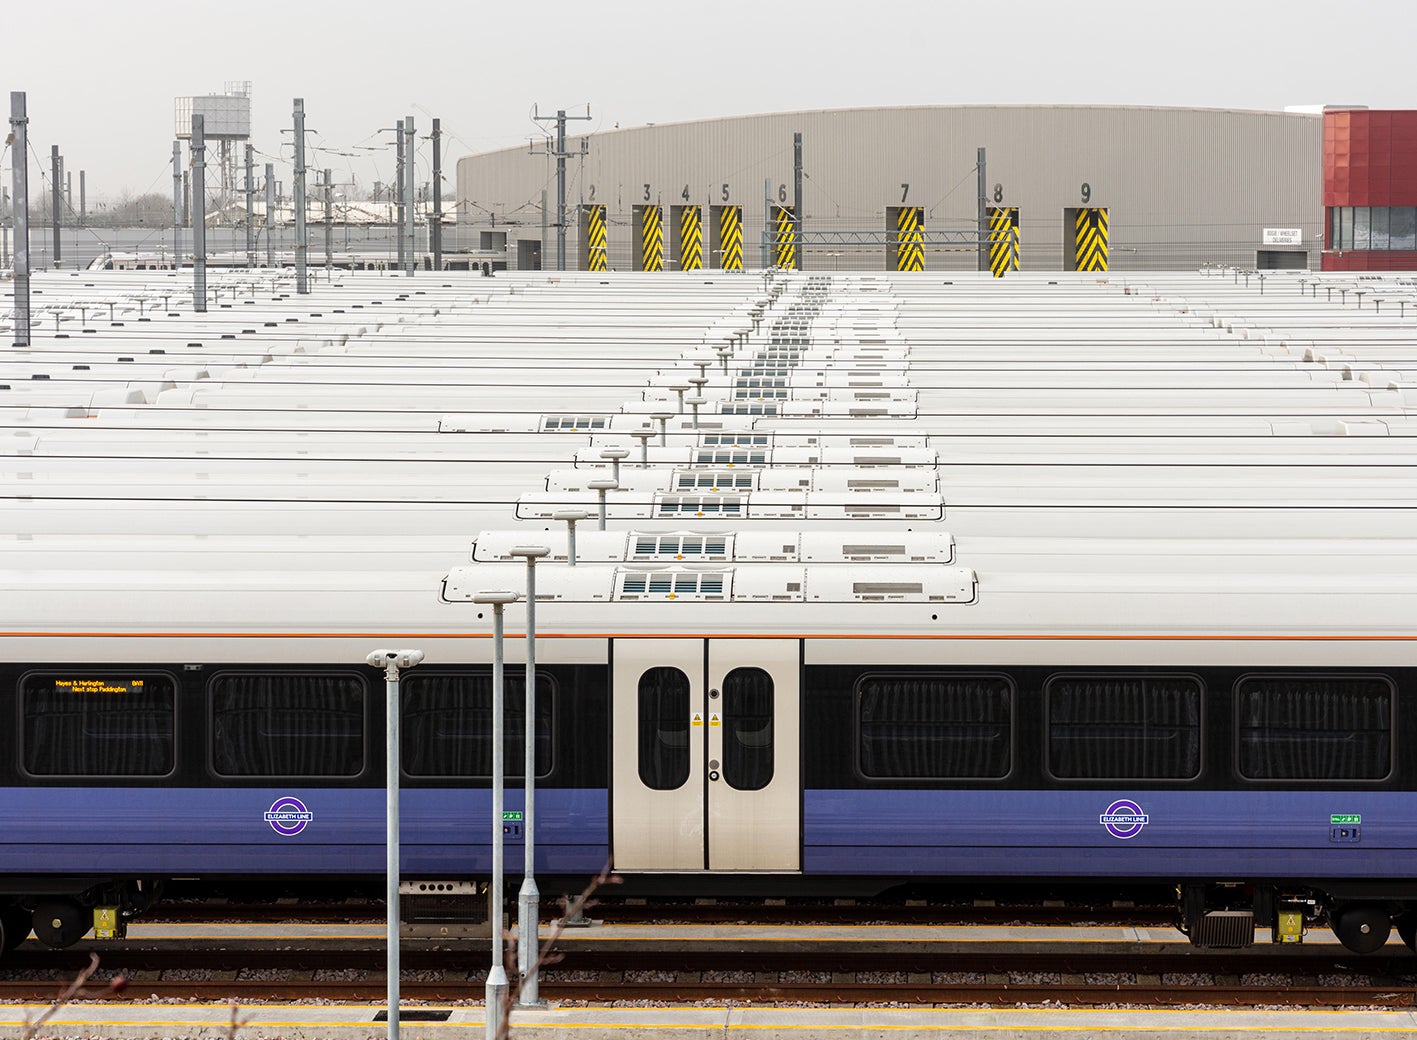 All hail the arrival of Crossrail